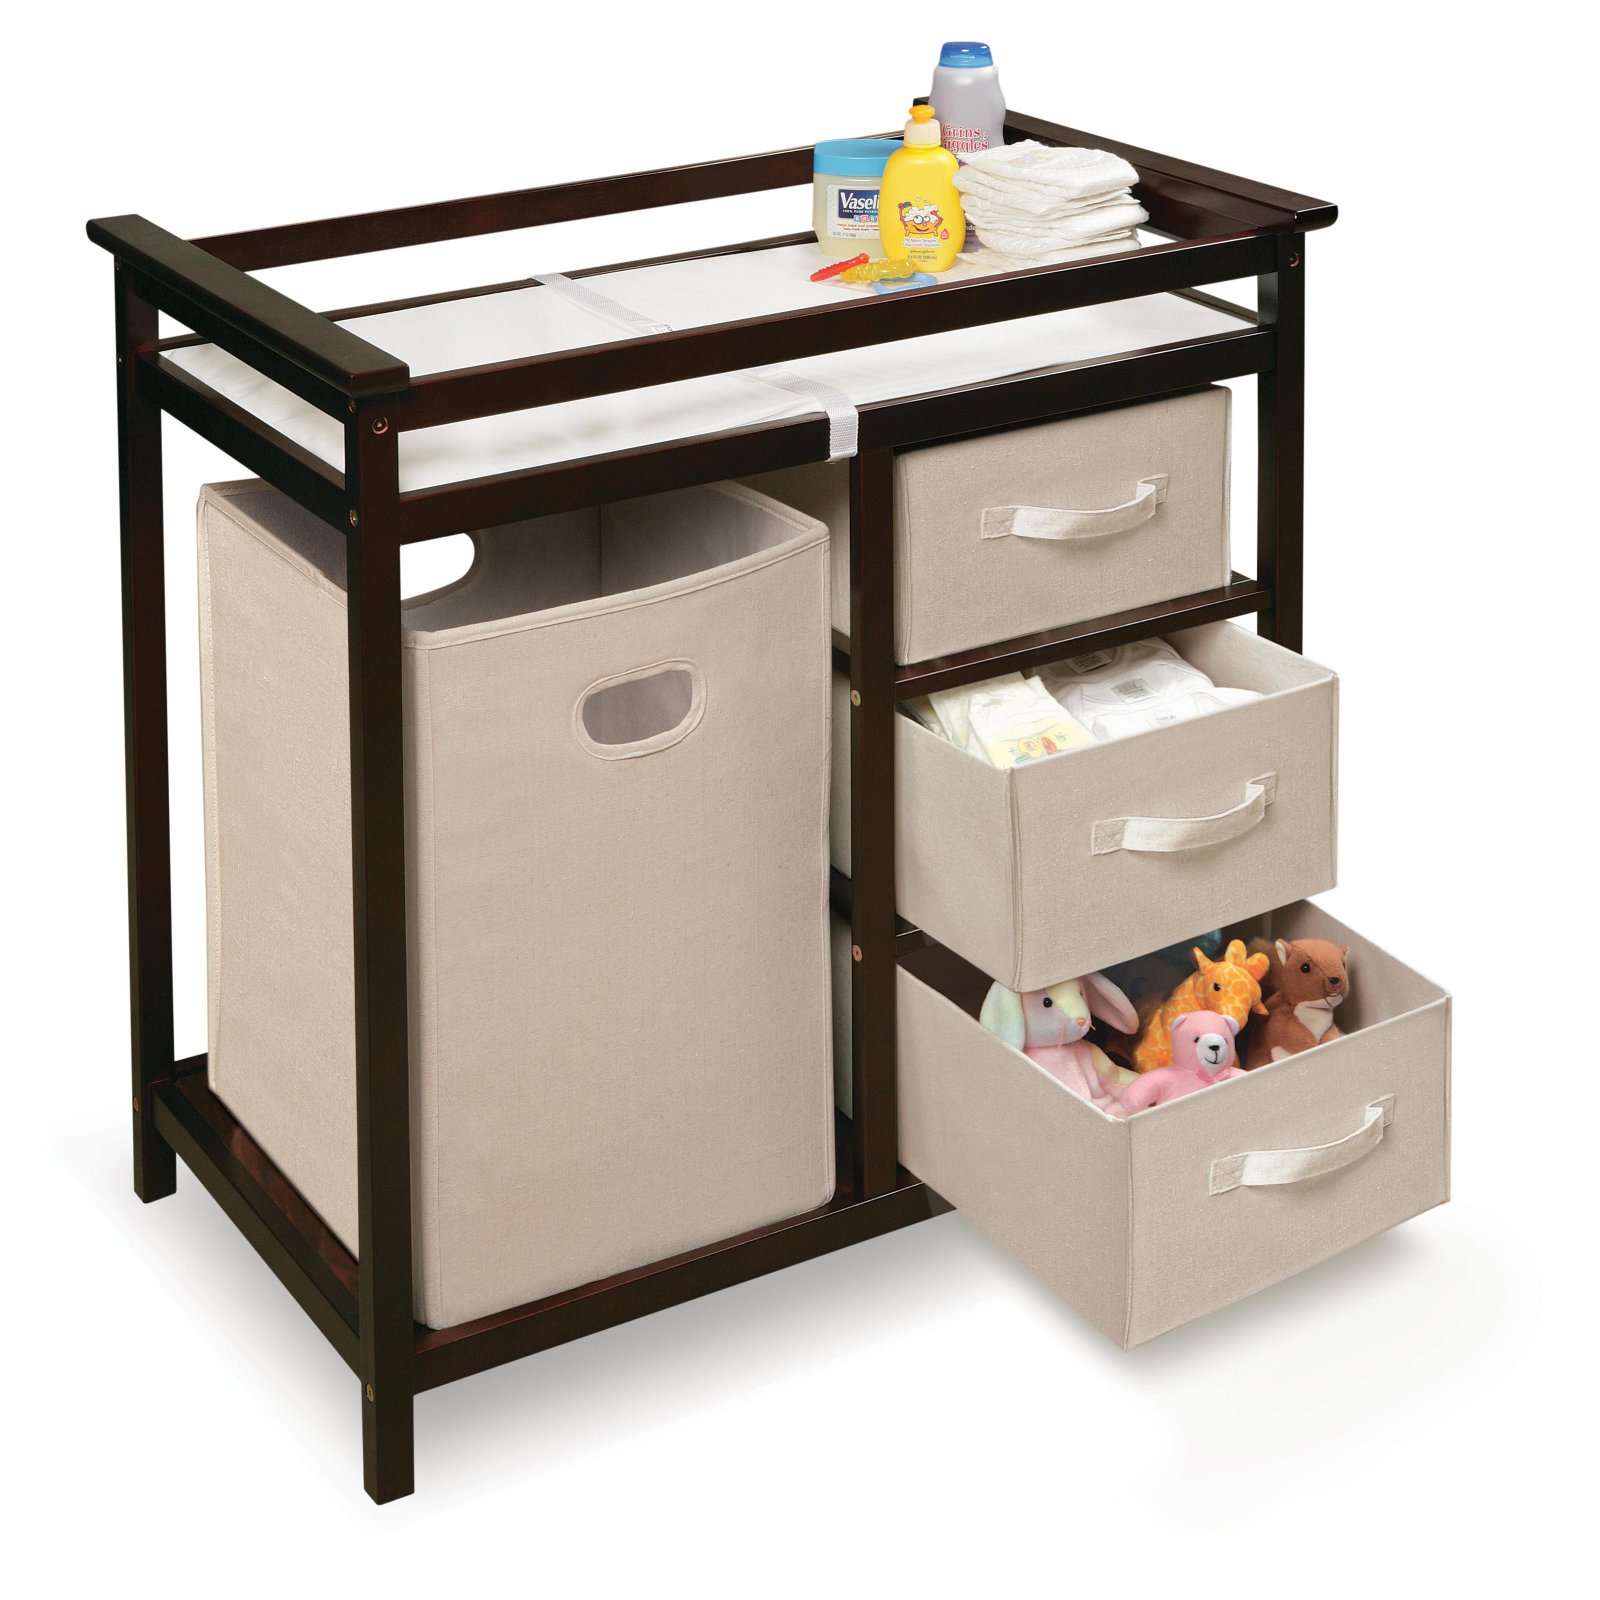 Badger Basket Modern Baby Changing Table with Hamper and 3 Baskets, White, Includes Pad - image 4 of 6